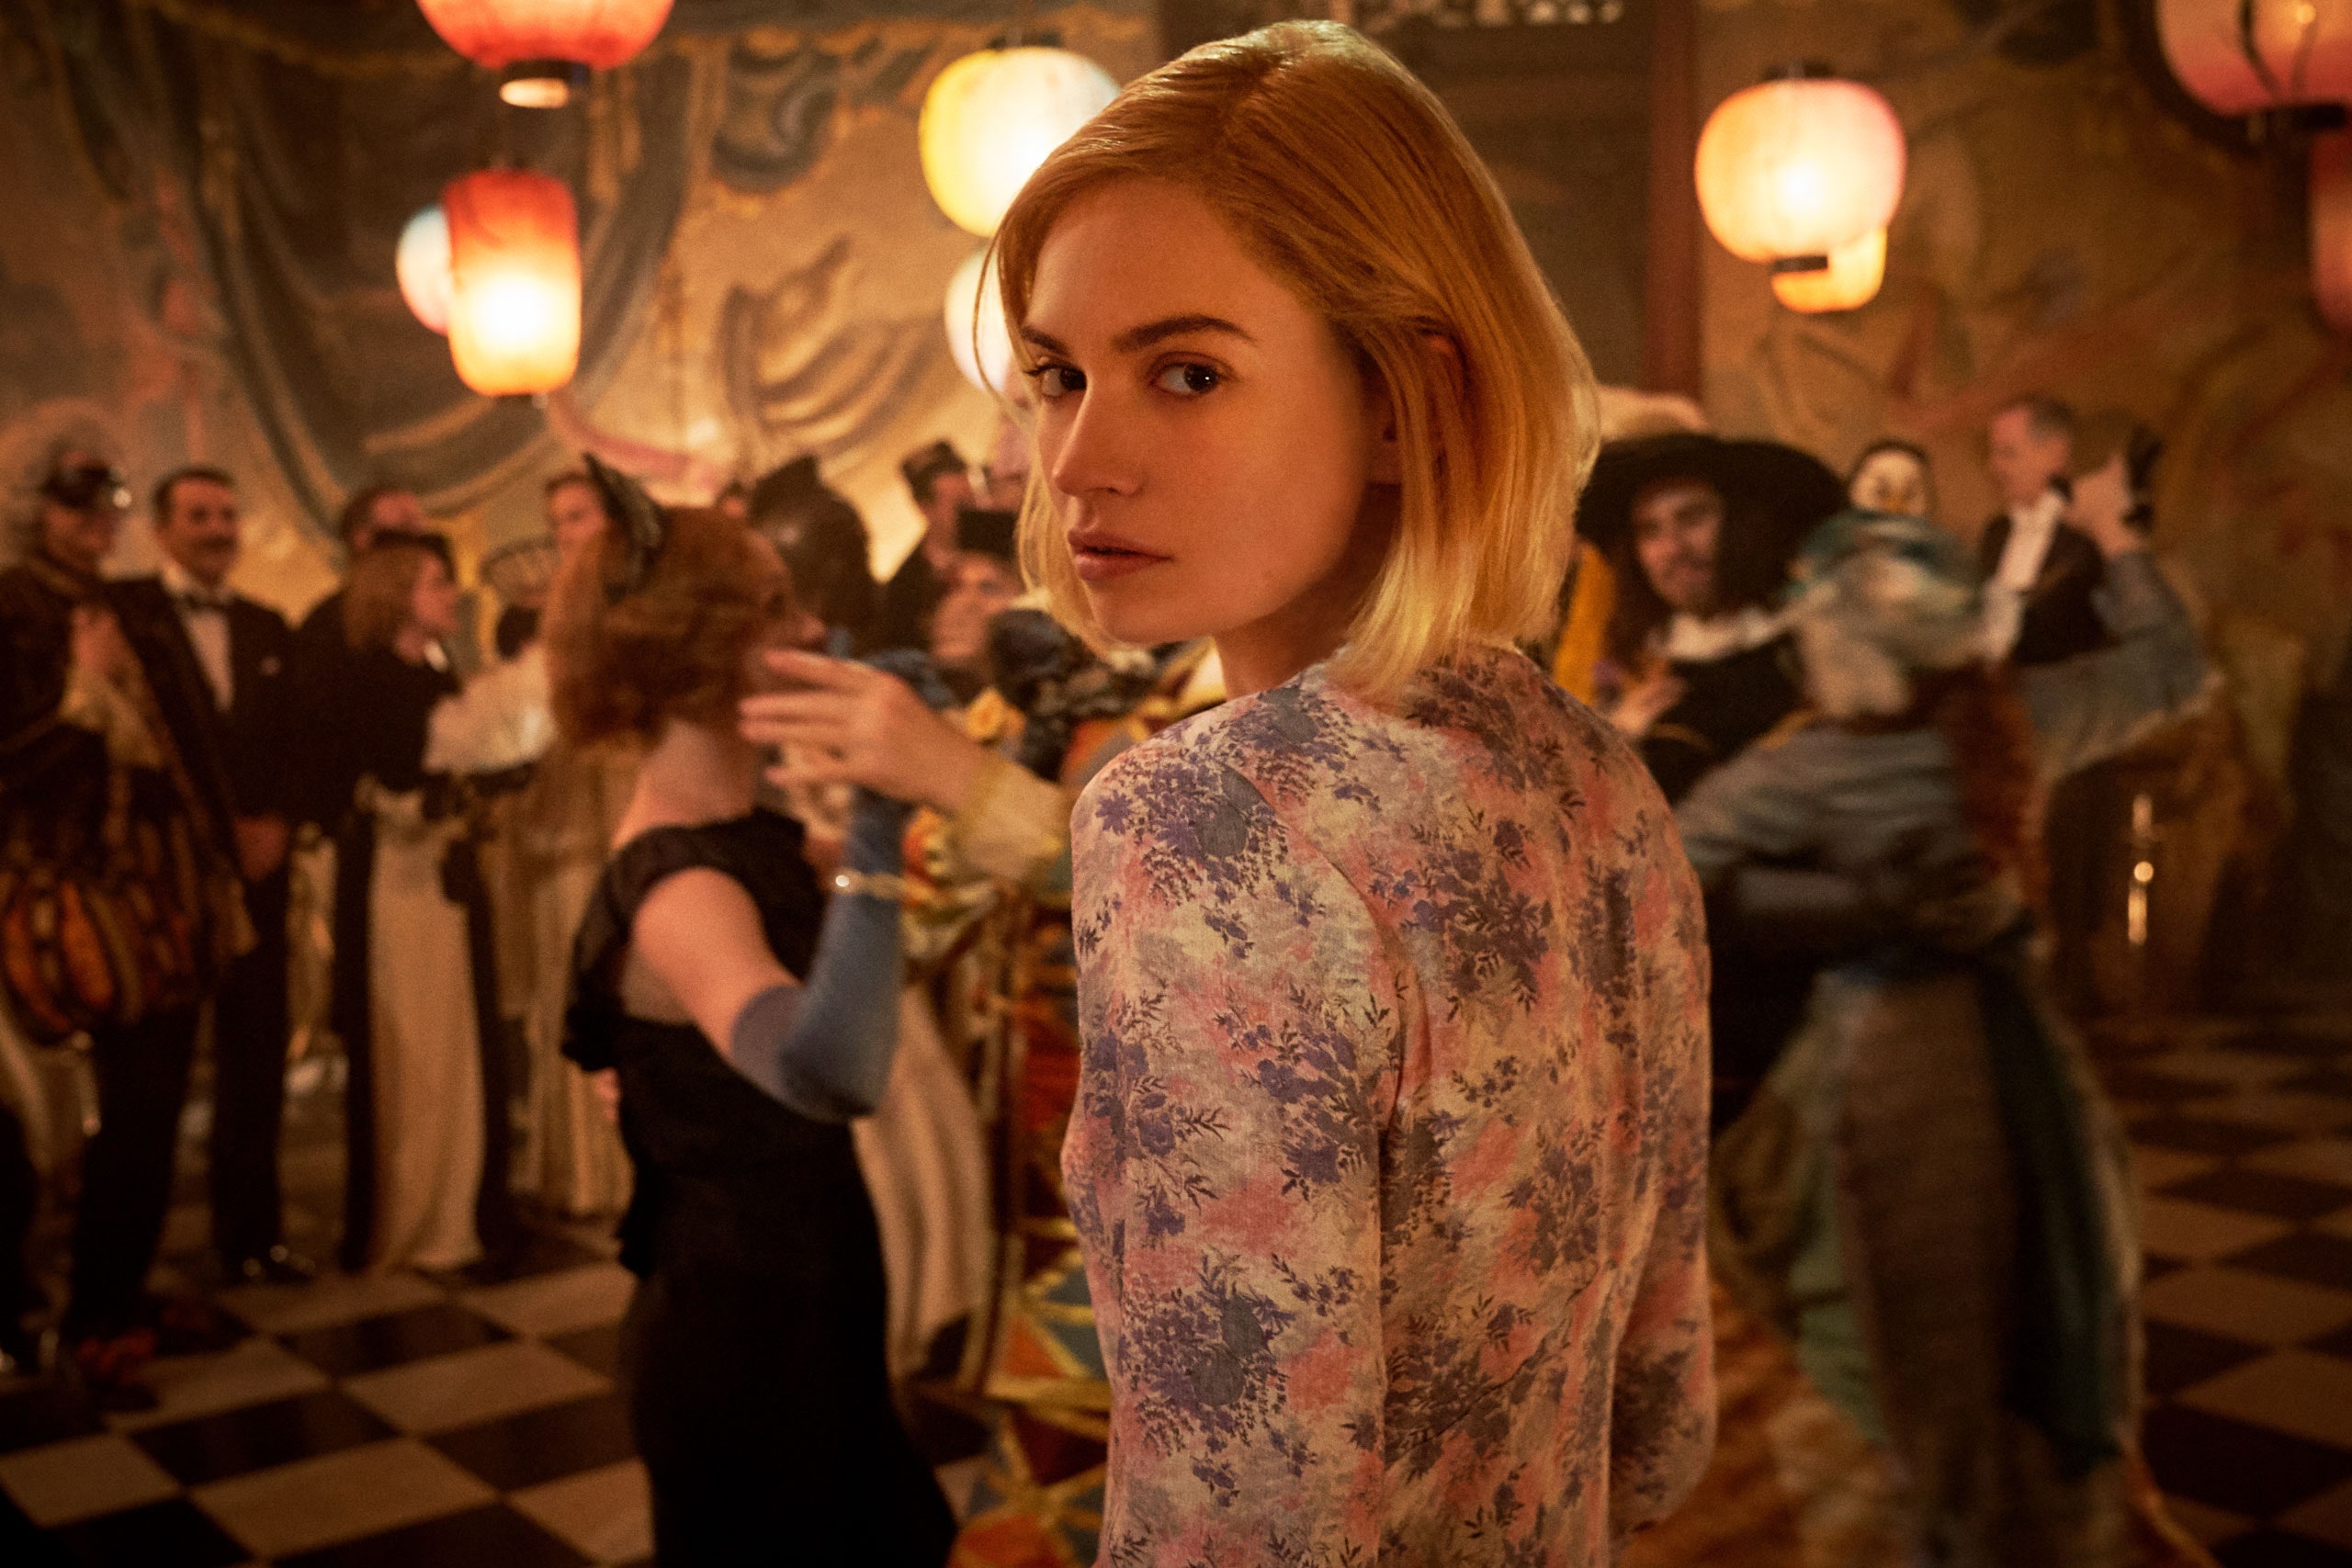 Actress Lily James 2020 Wallpapers